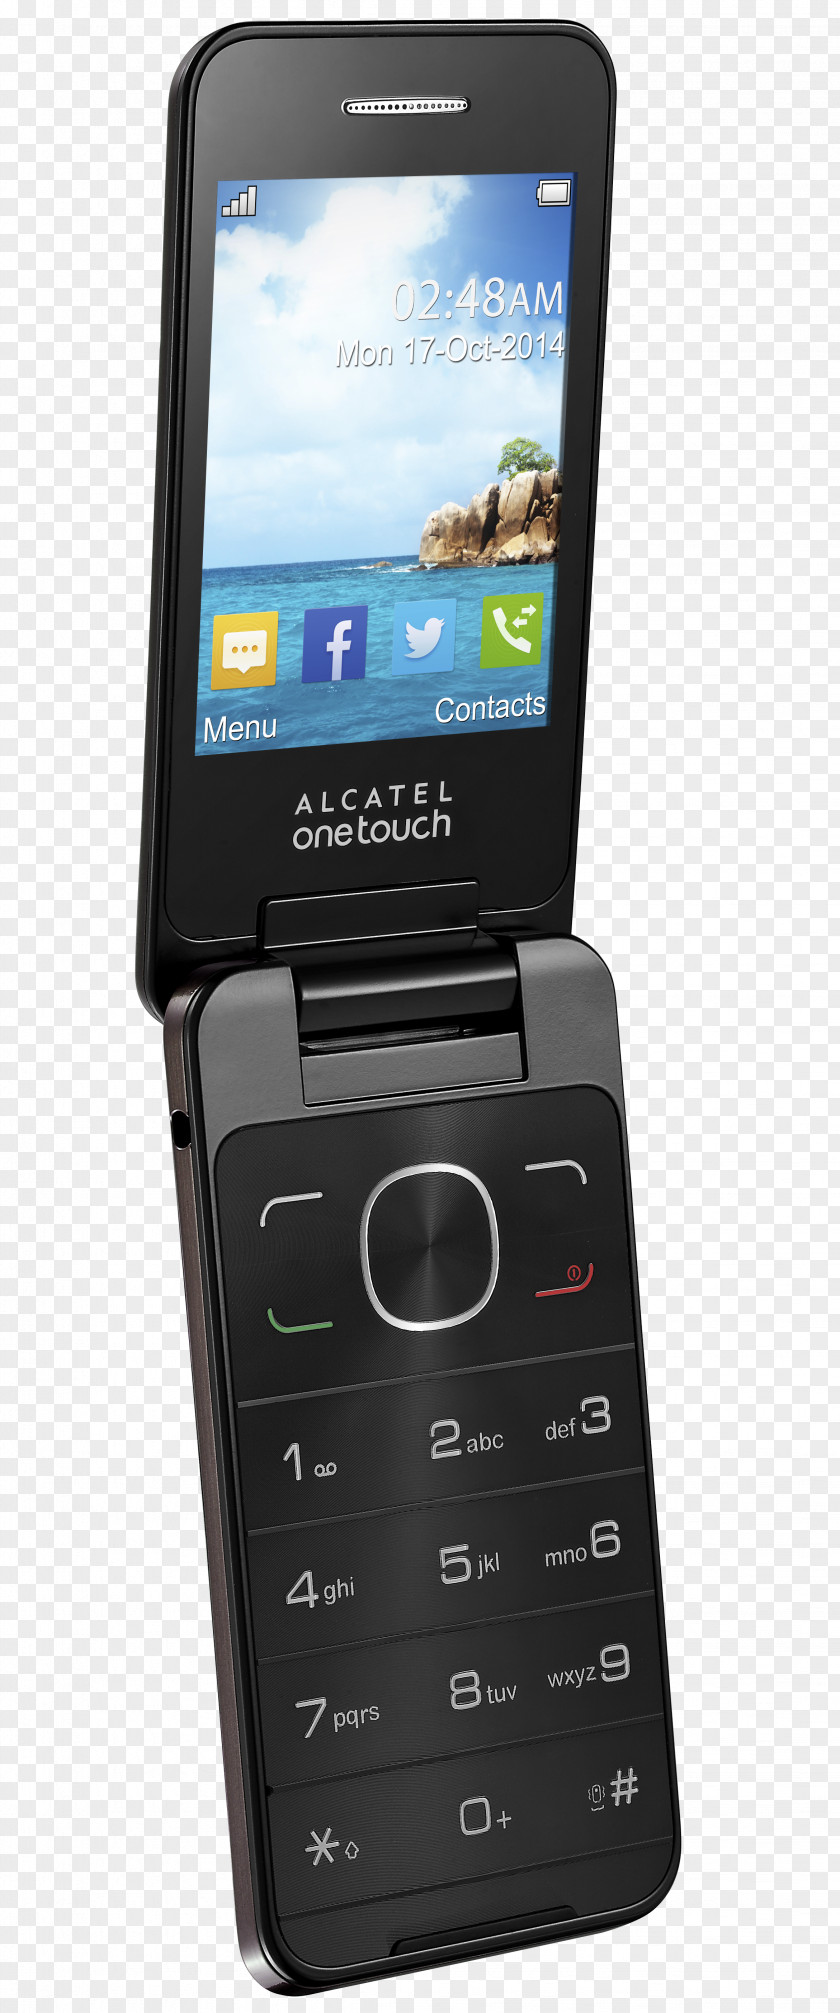 Eating Chocolate Alcatel One Touch Mobile Clamshell Design Telephone Smartphone PNG